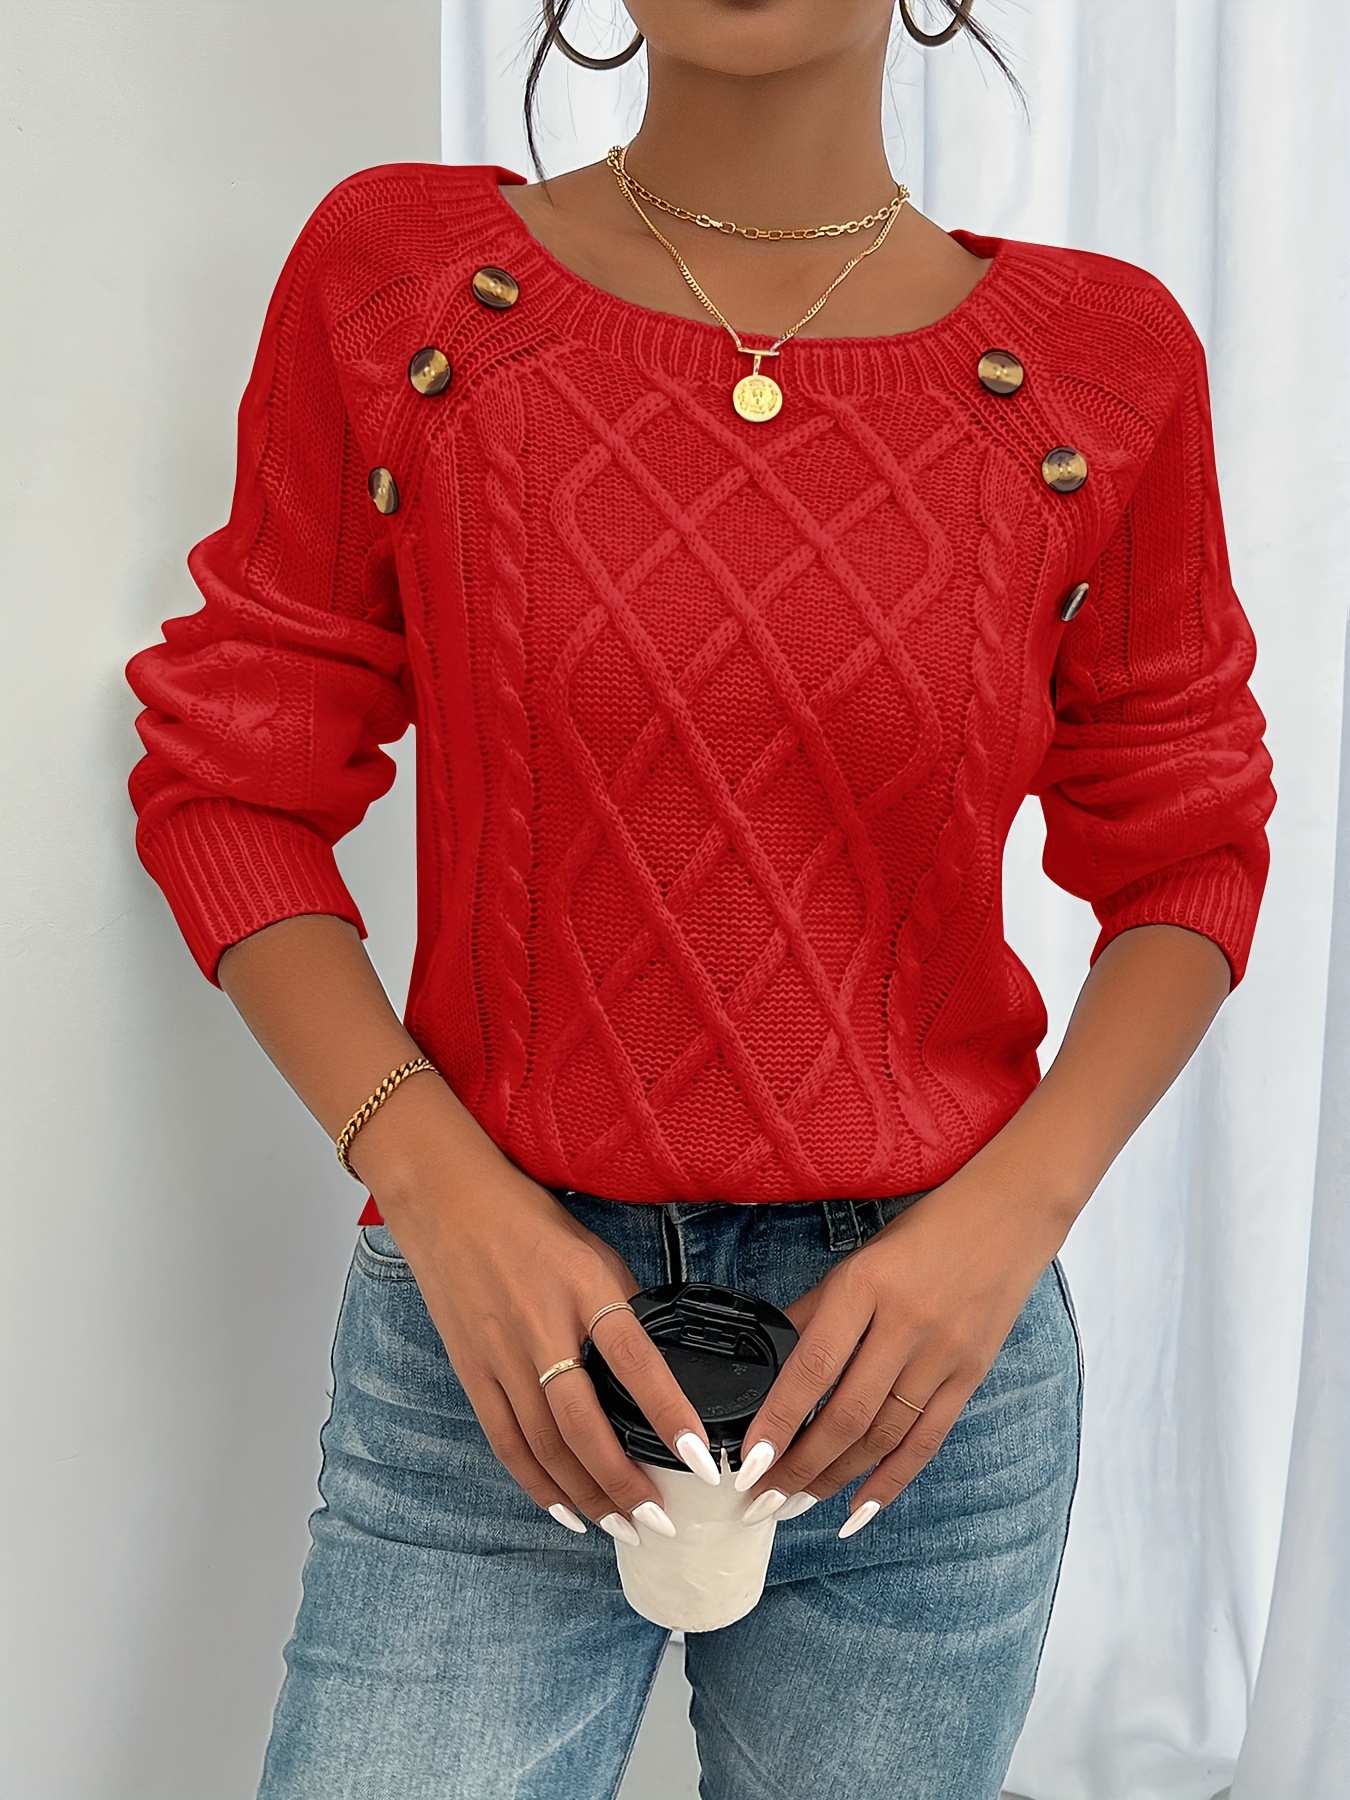 long sleeve cable knit sweater casual crew neck sweater womens clothing